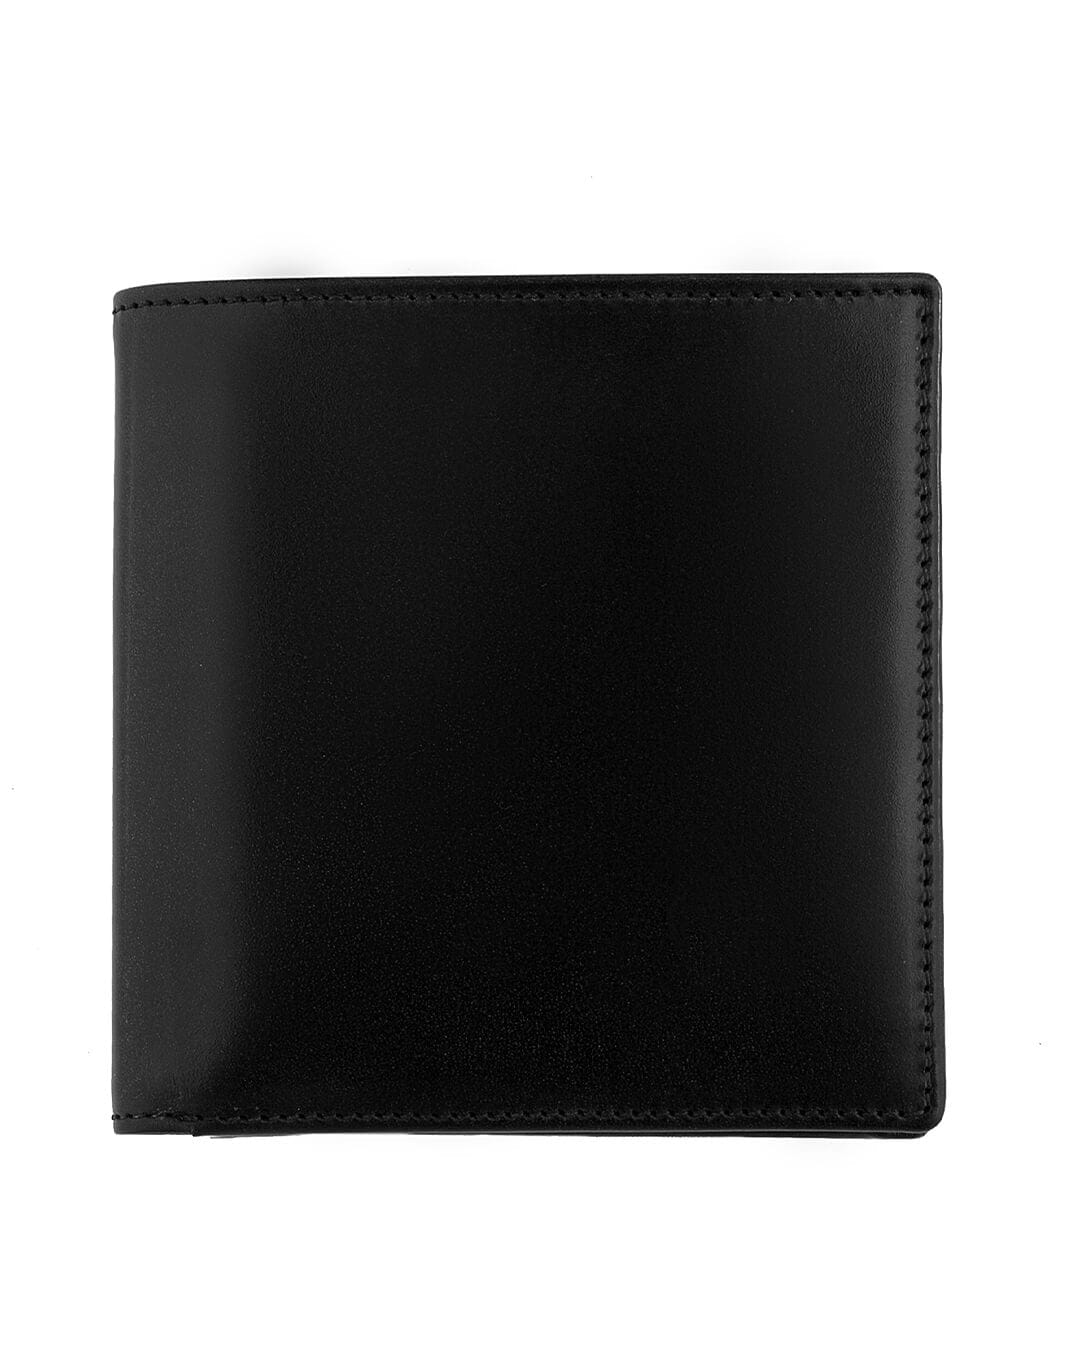 Cavesson's Wallets Cavesson's Black And Olive Coin Wallet